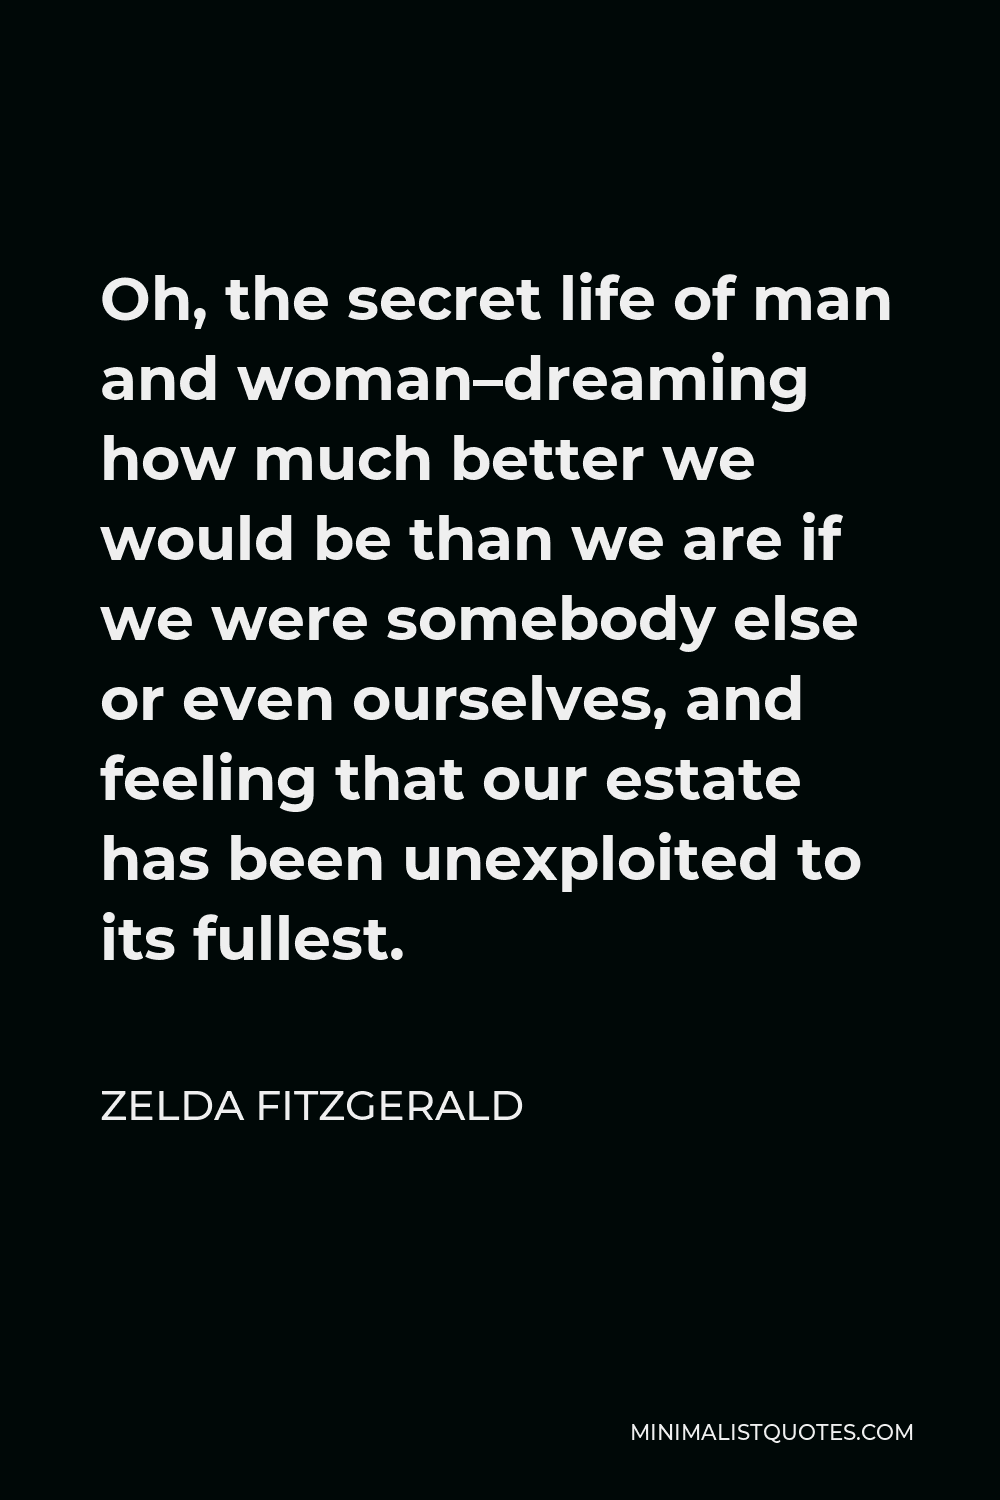 Zelda Fitzgerald Quote - Oh, the secret life of man and woman–dreaming how much better we would be than we are if we were somebody else or even ourselves, and feeling that our estate has been unexploited to its fullest.